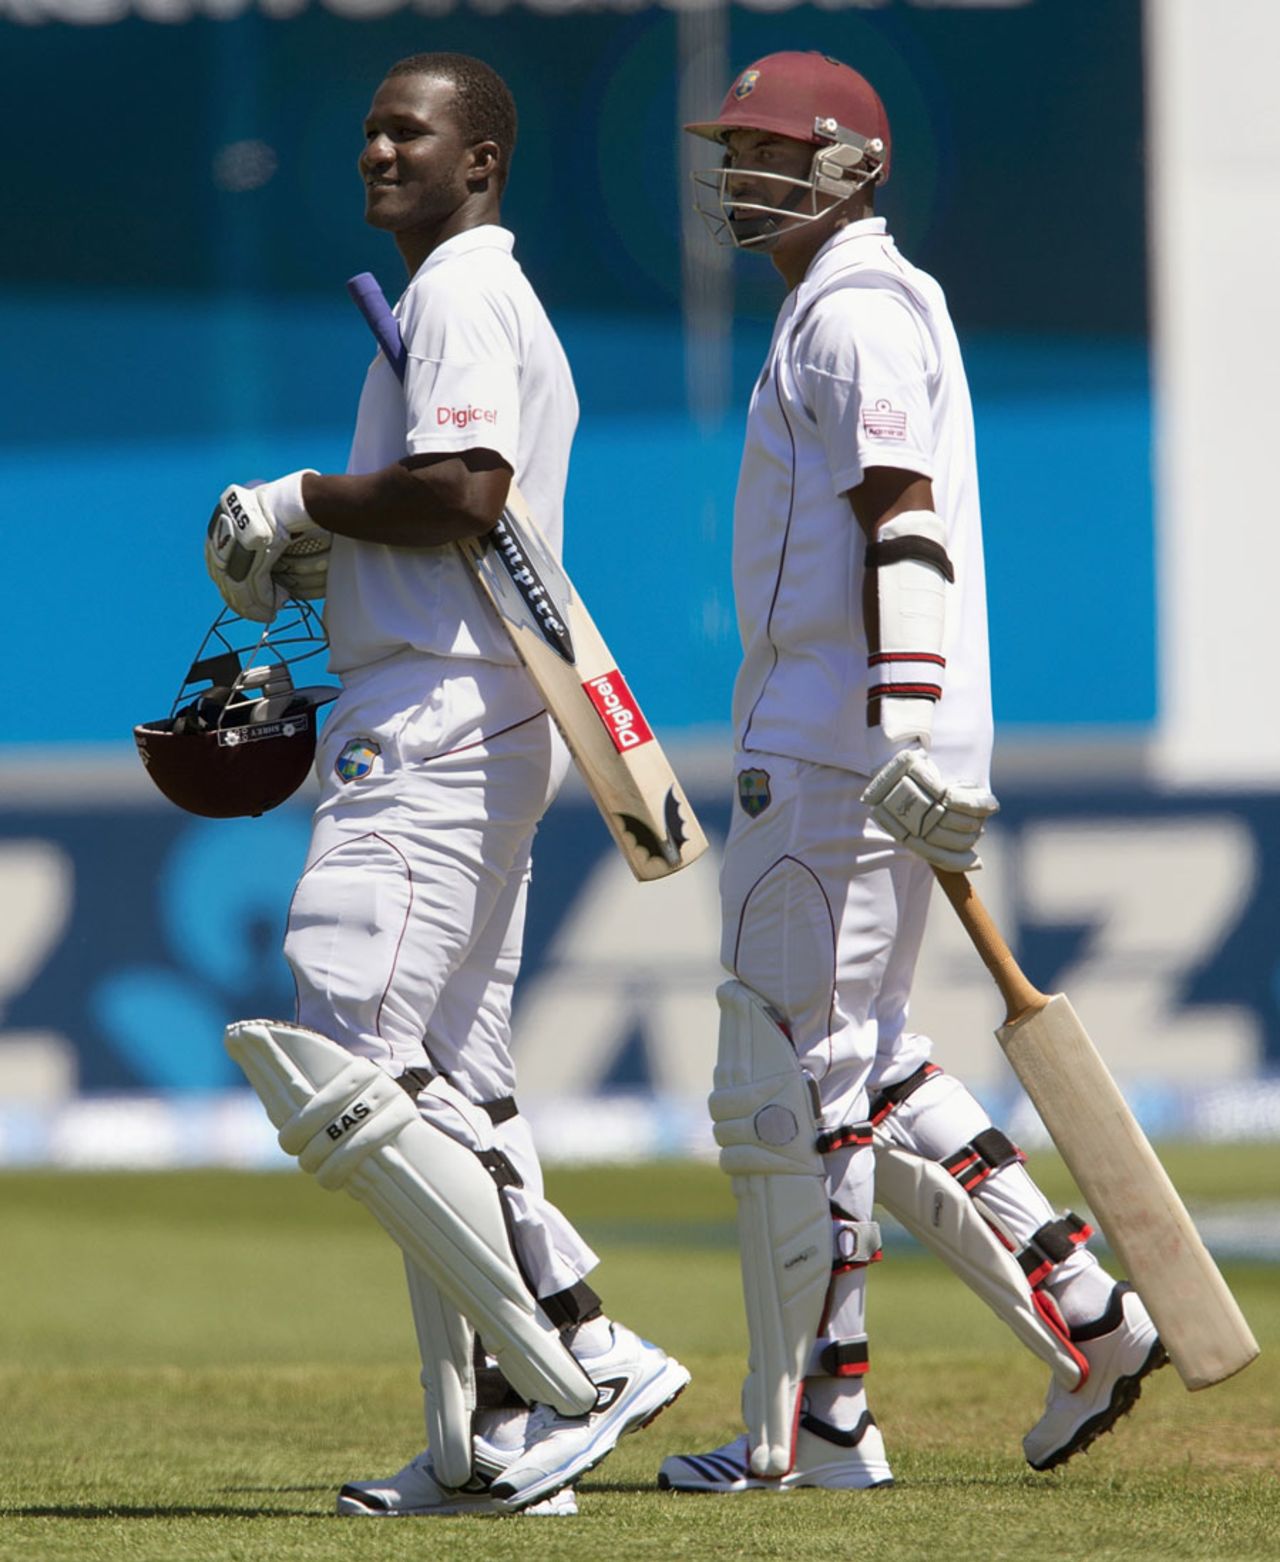 Darren Sammy and Shannon Gabriel walk off at the end of the first innings, New Zealand v West Indies, 1st Test, Dunedin, 3rd day, December 5, 2013